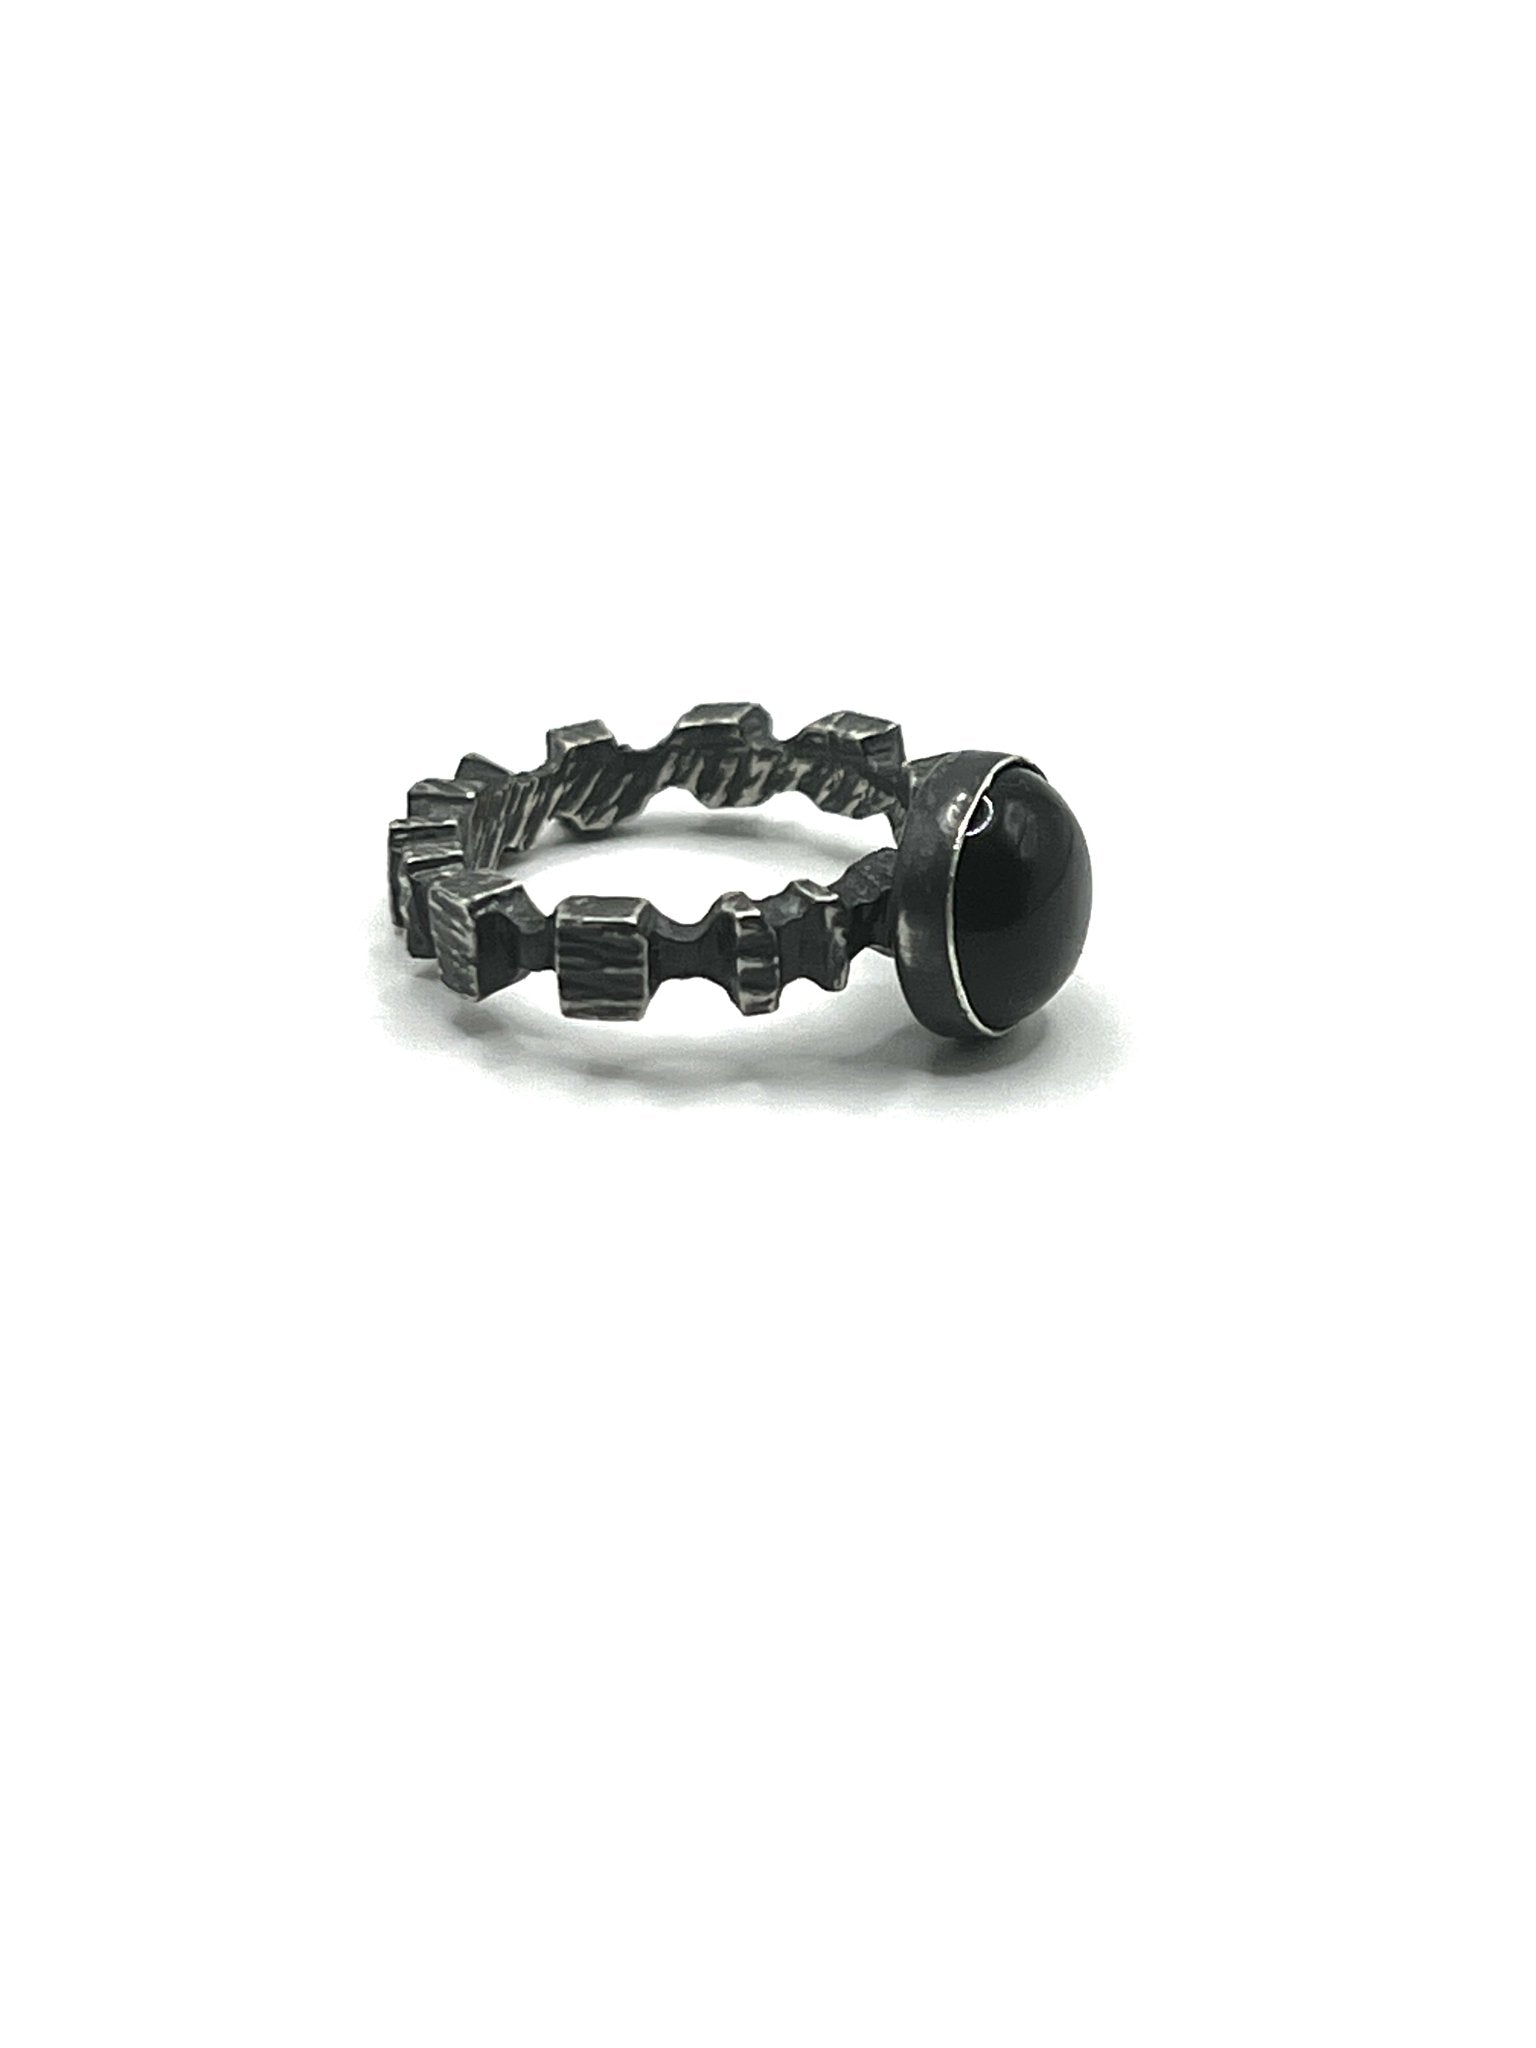 Chain Black Onyx Ring by Julian the 2nd - Nocturne LLC